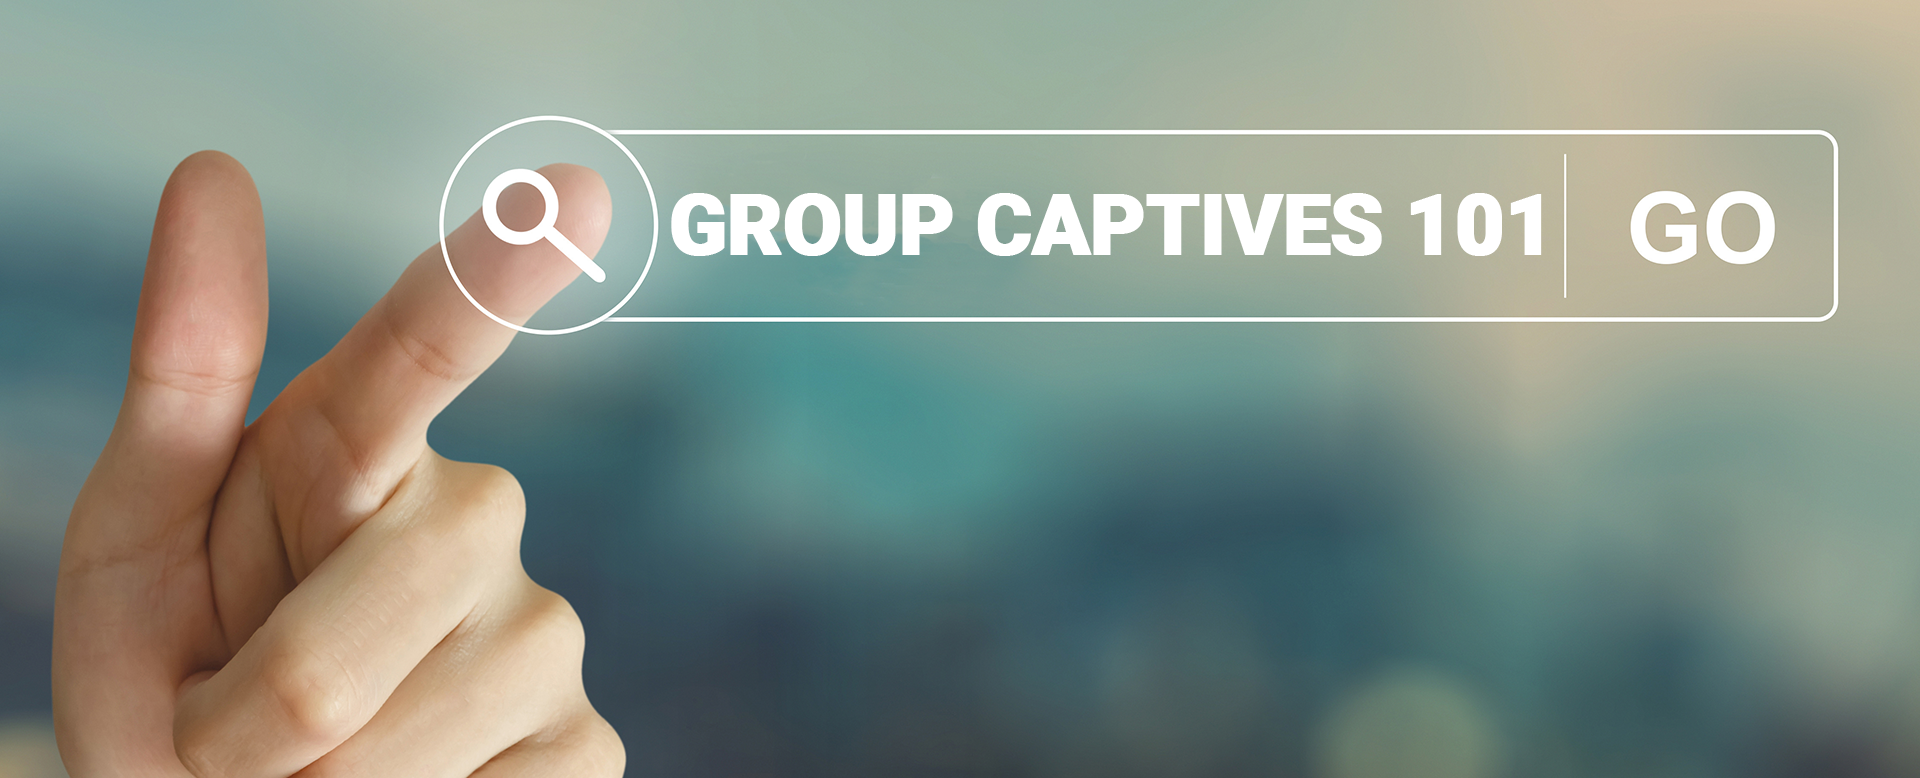 Group Captives 101 What is a Group Captive? Captive Resources